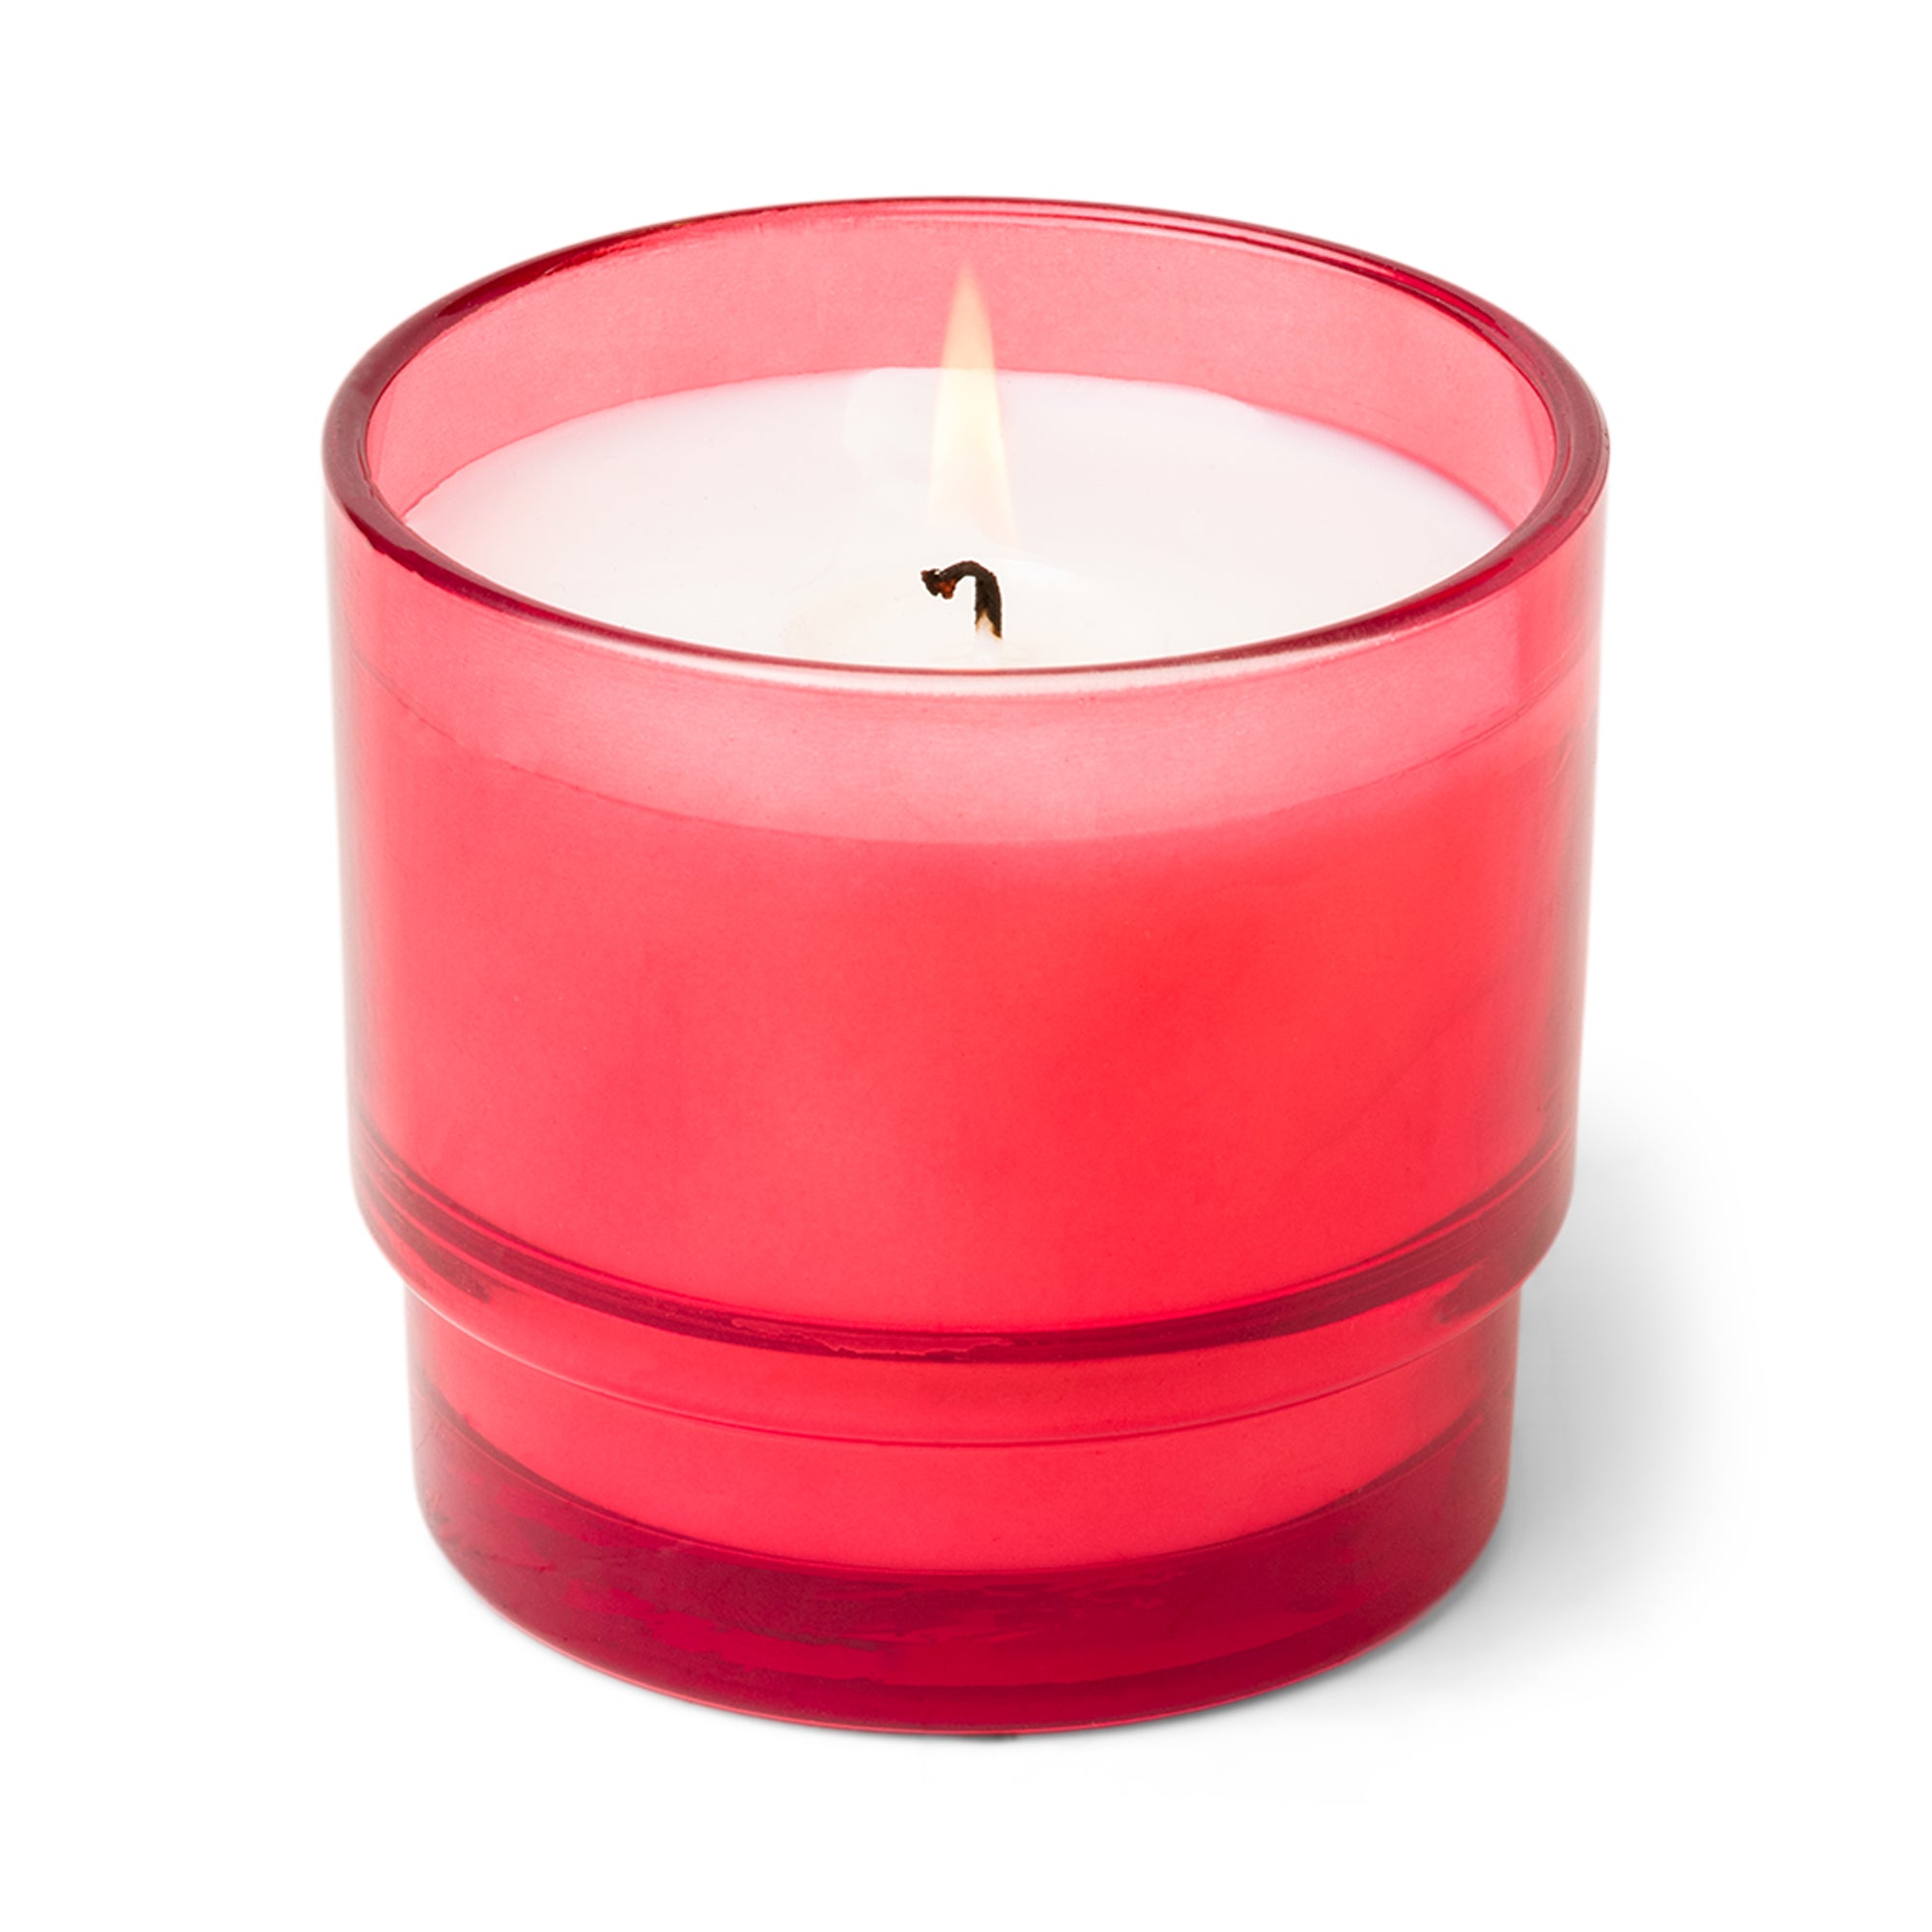 Paddy Wax Al Fresco Glass Candle (198g) - Red - Rosewood Vanilla